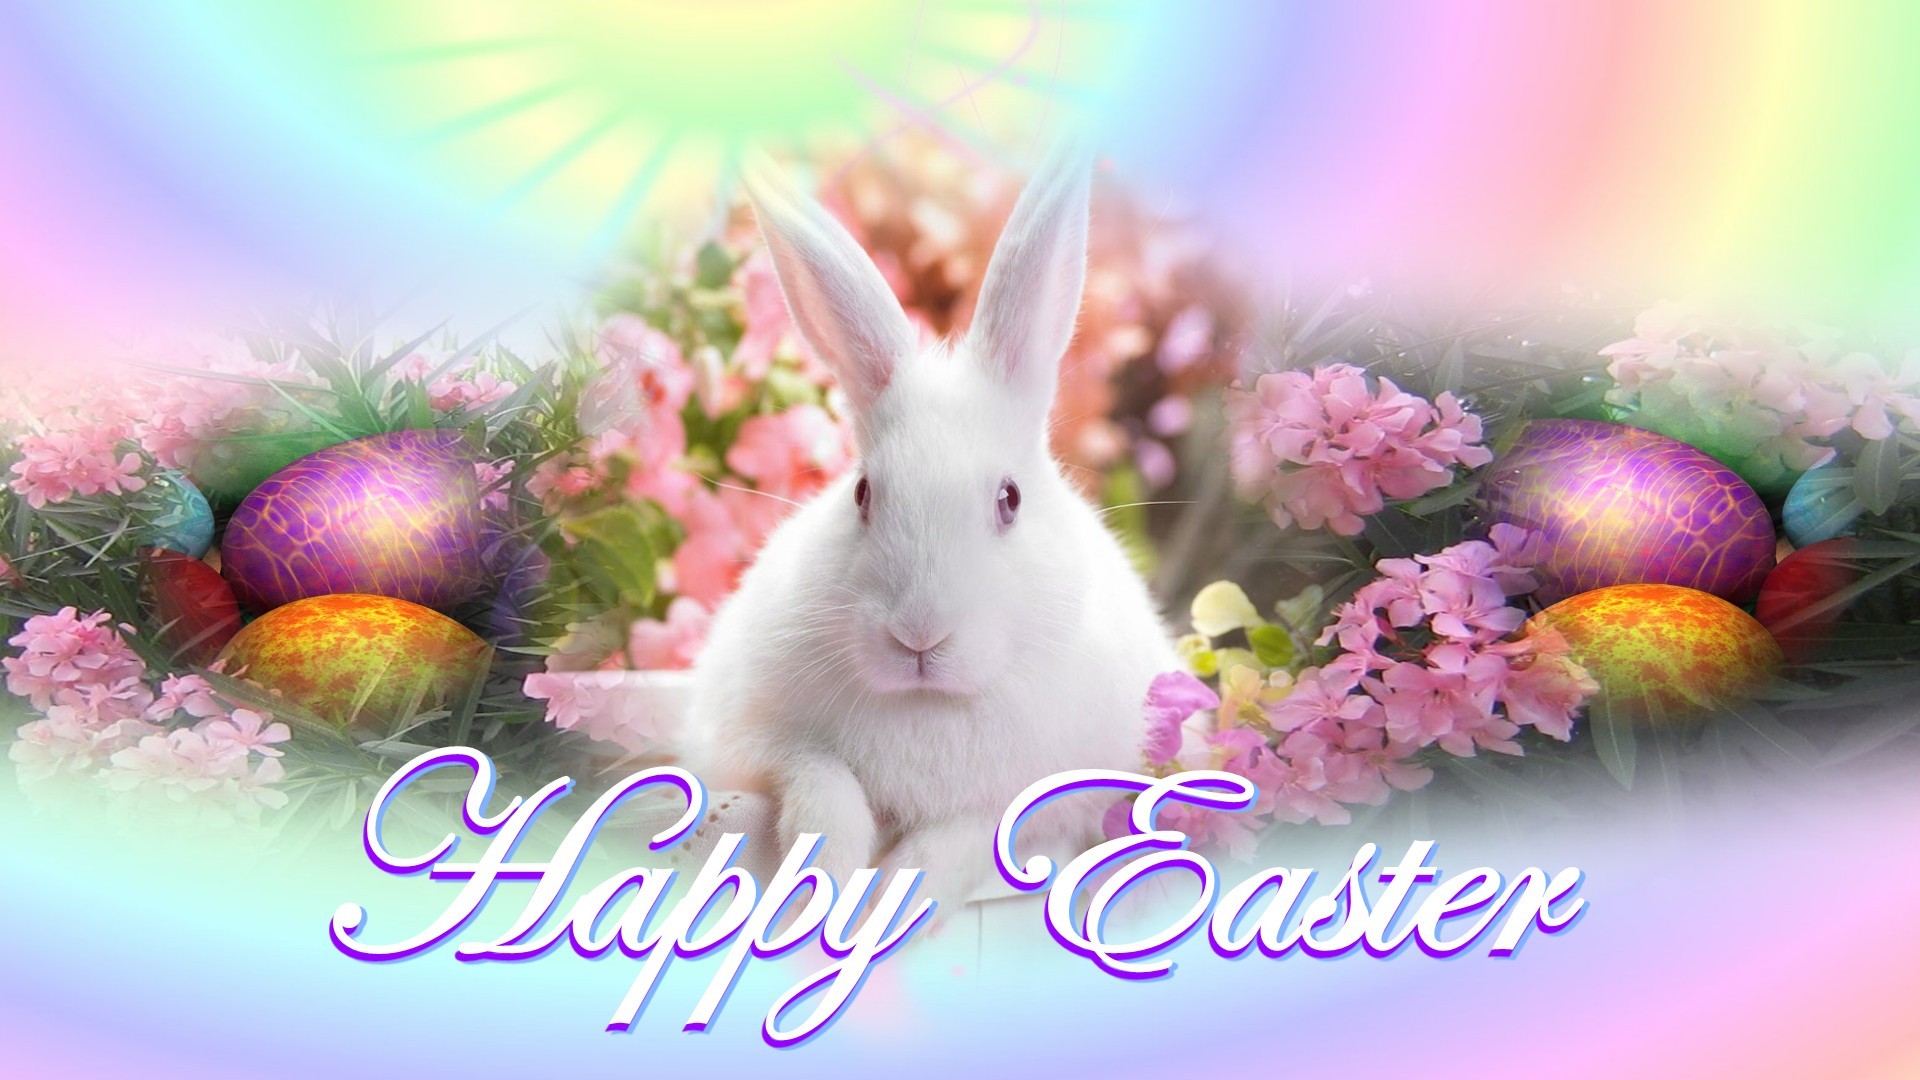 Easter Sunday Greetings Bunny Eggs Wallpaper Background